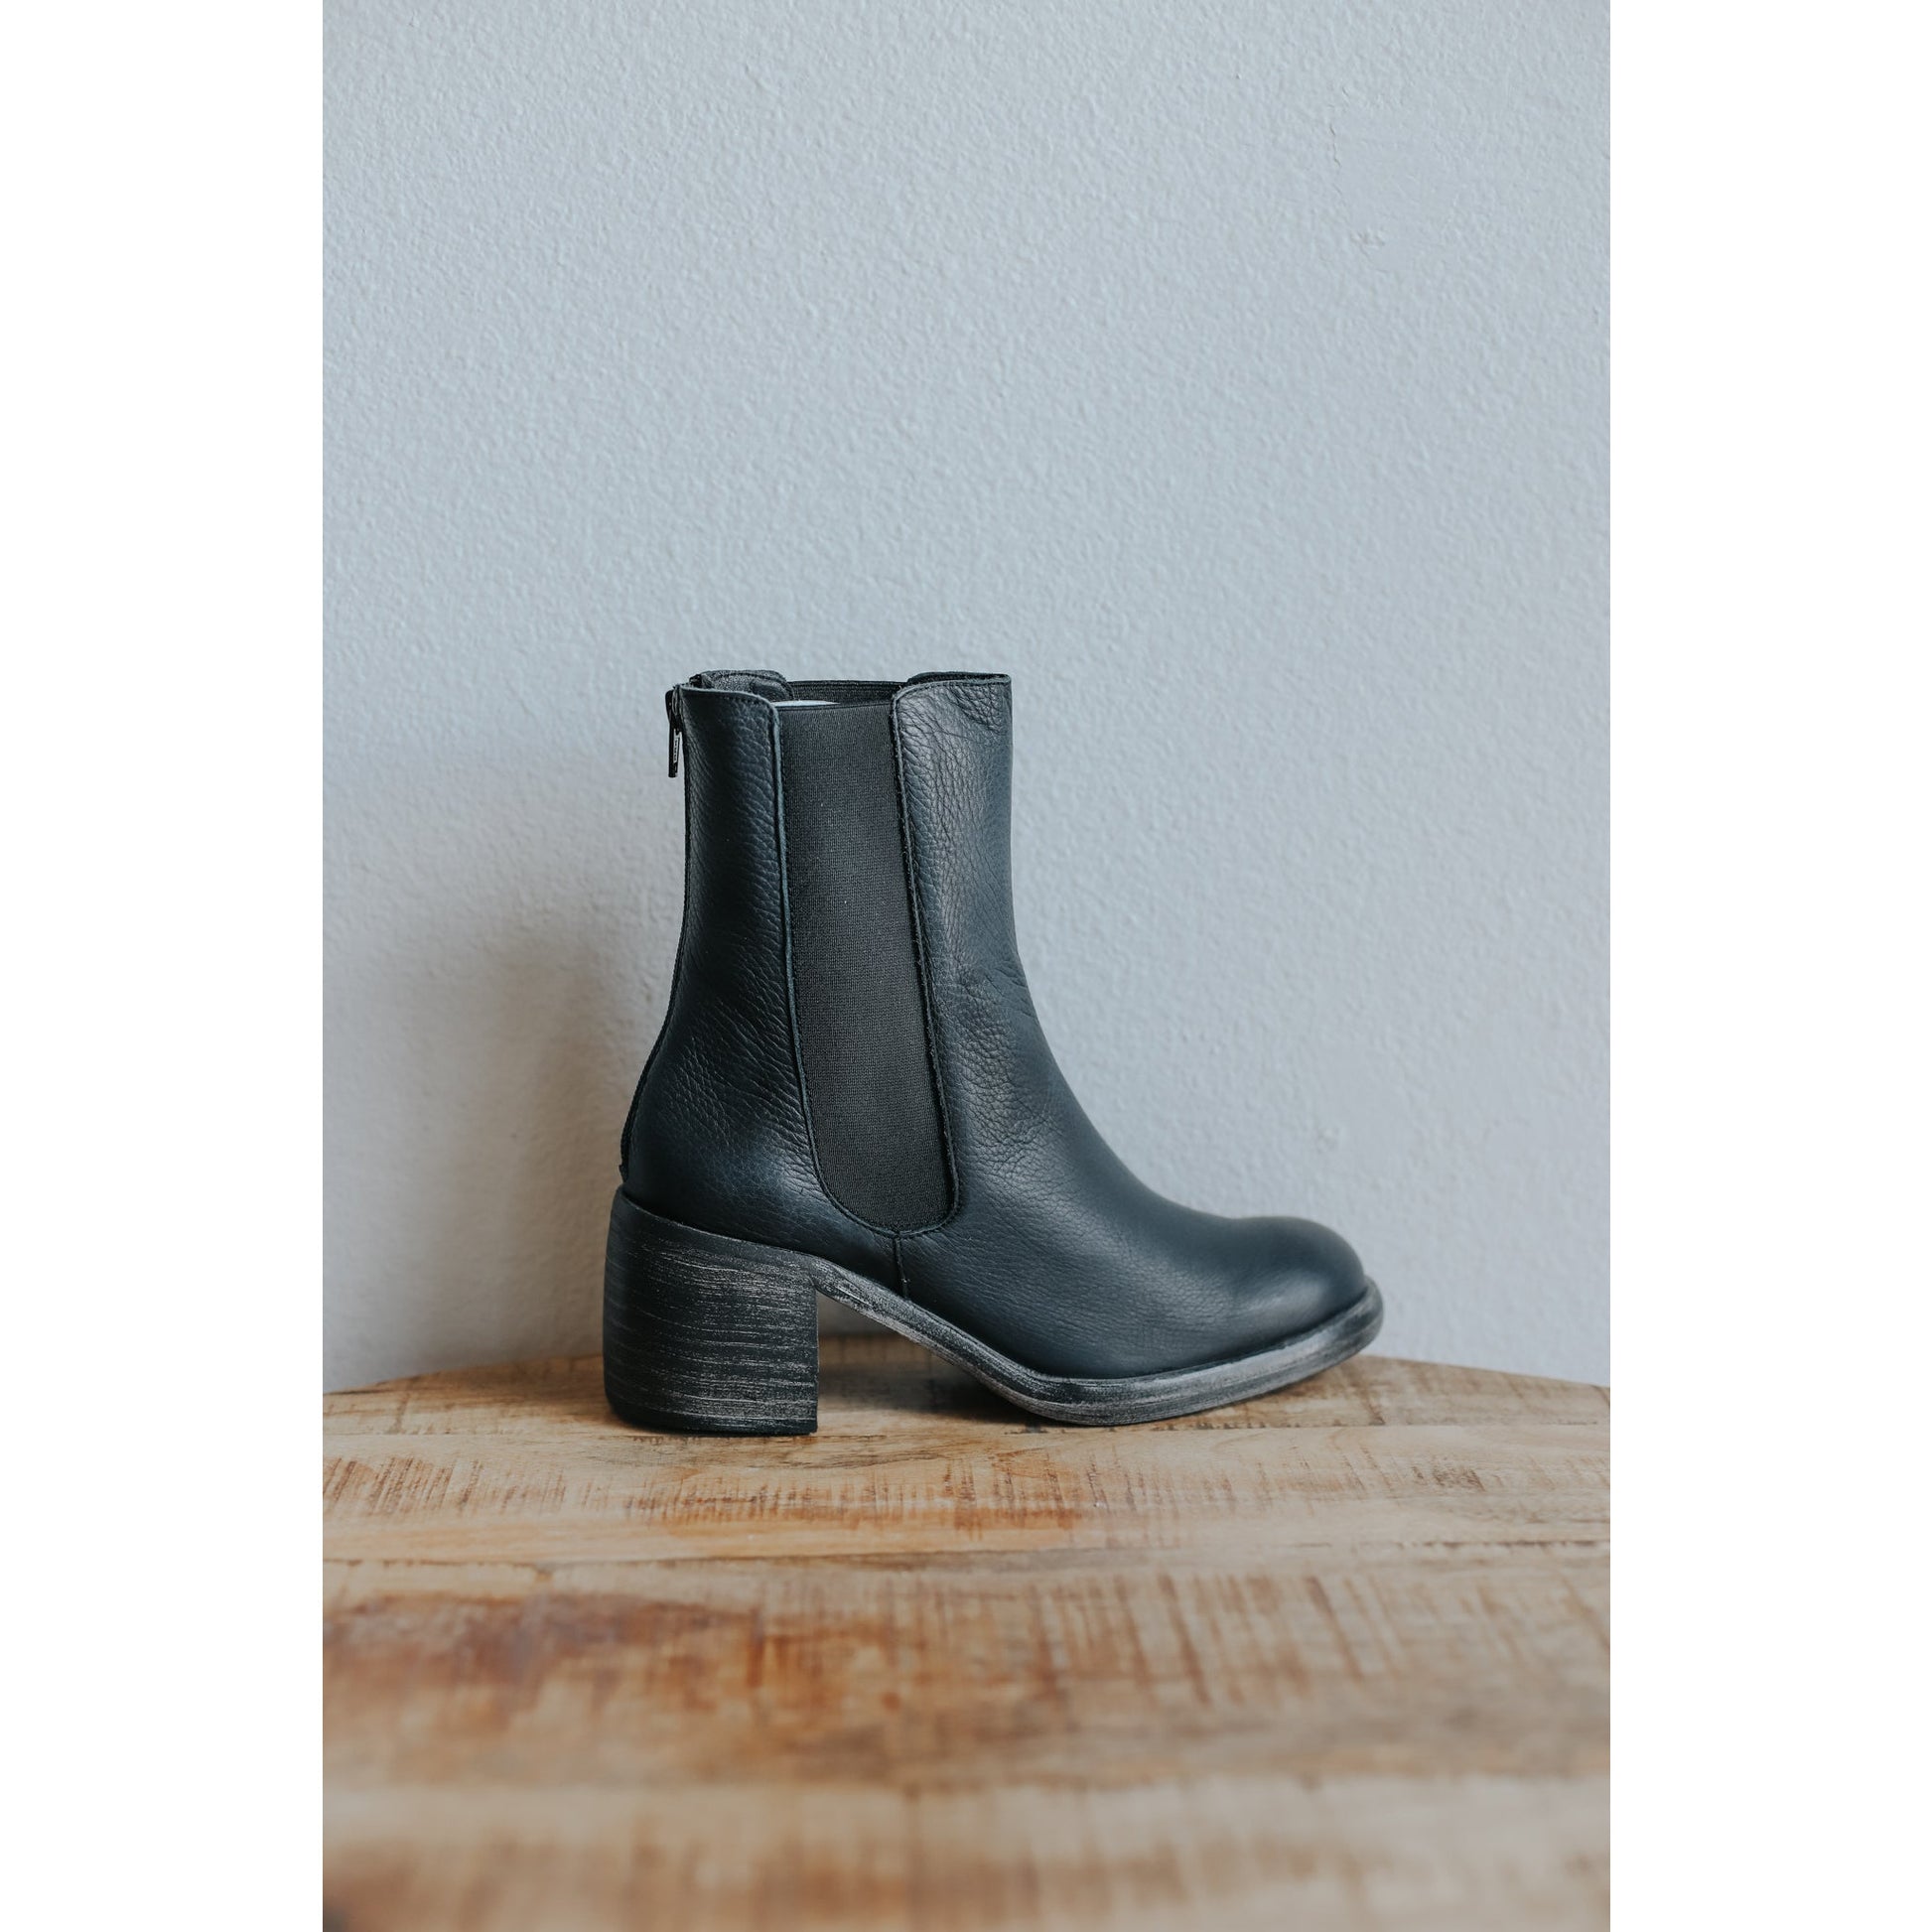 Free People Essential Chelsea Boots - Black – The Local Honey Collective